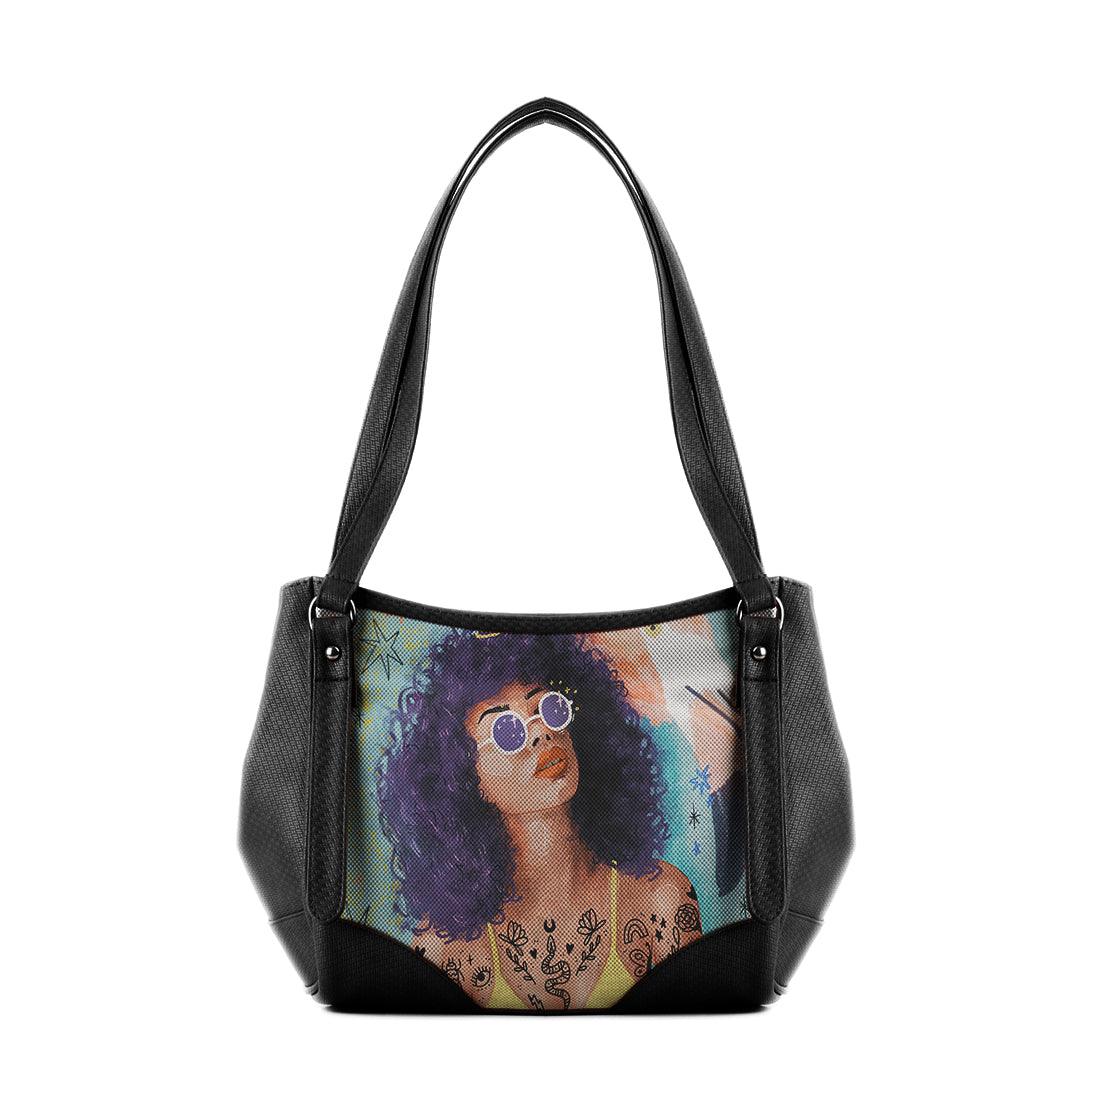 Black Leather Tote Bag Flamingo Queen - CANVAEGYPT